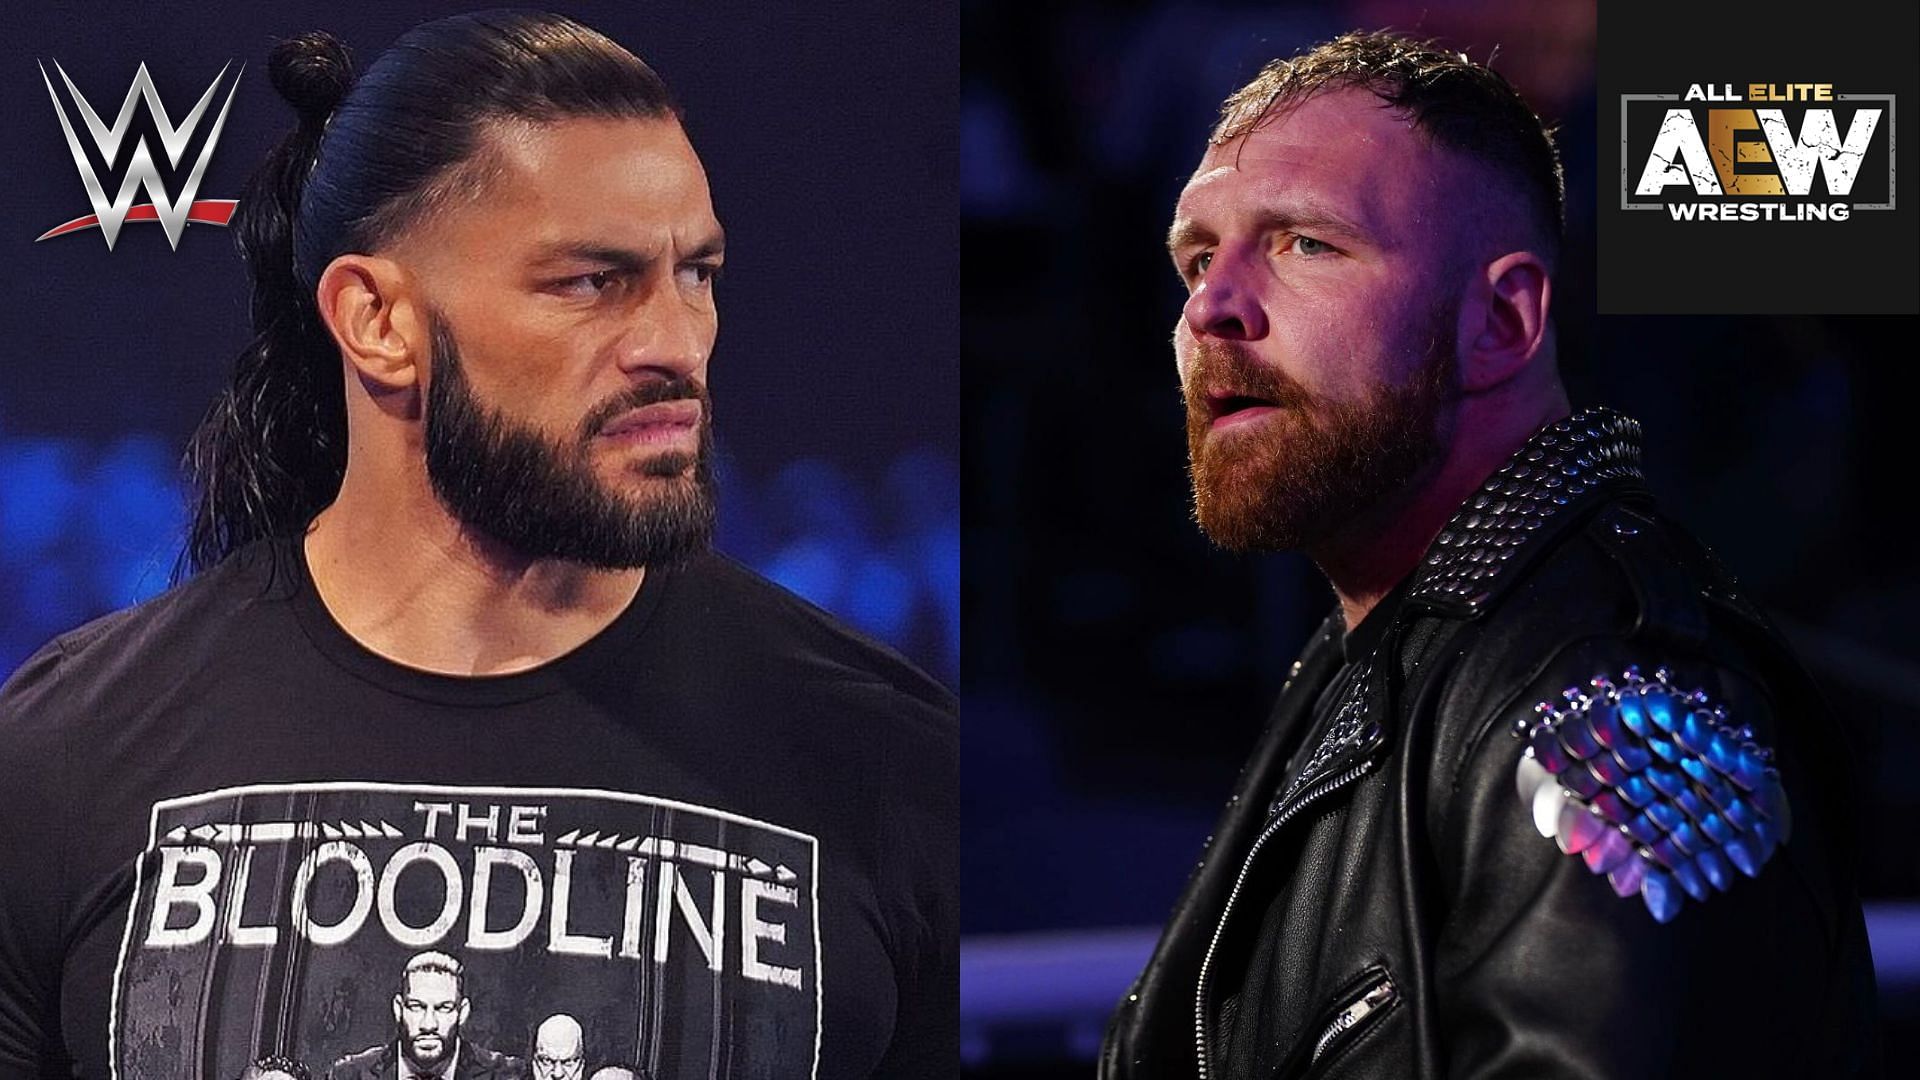 Roman Reigns and Jon Moxley are yet to have a heated feud